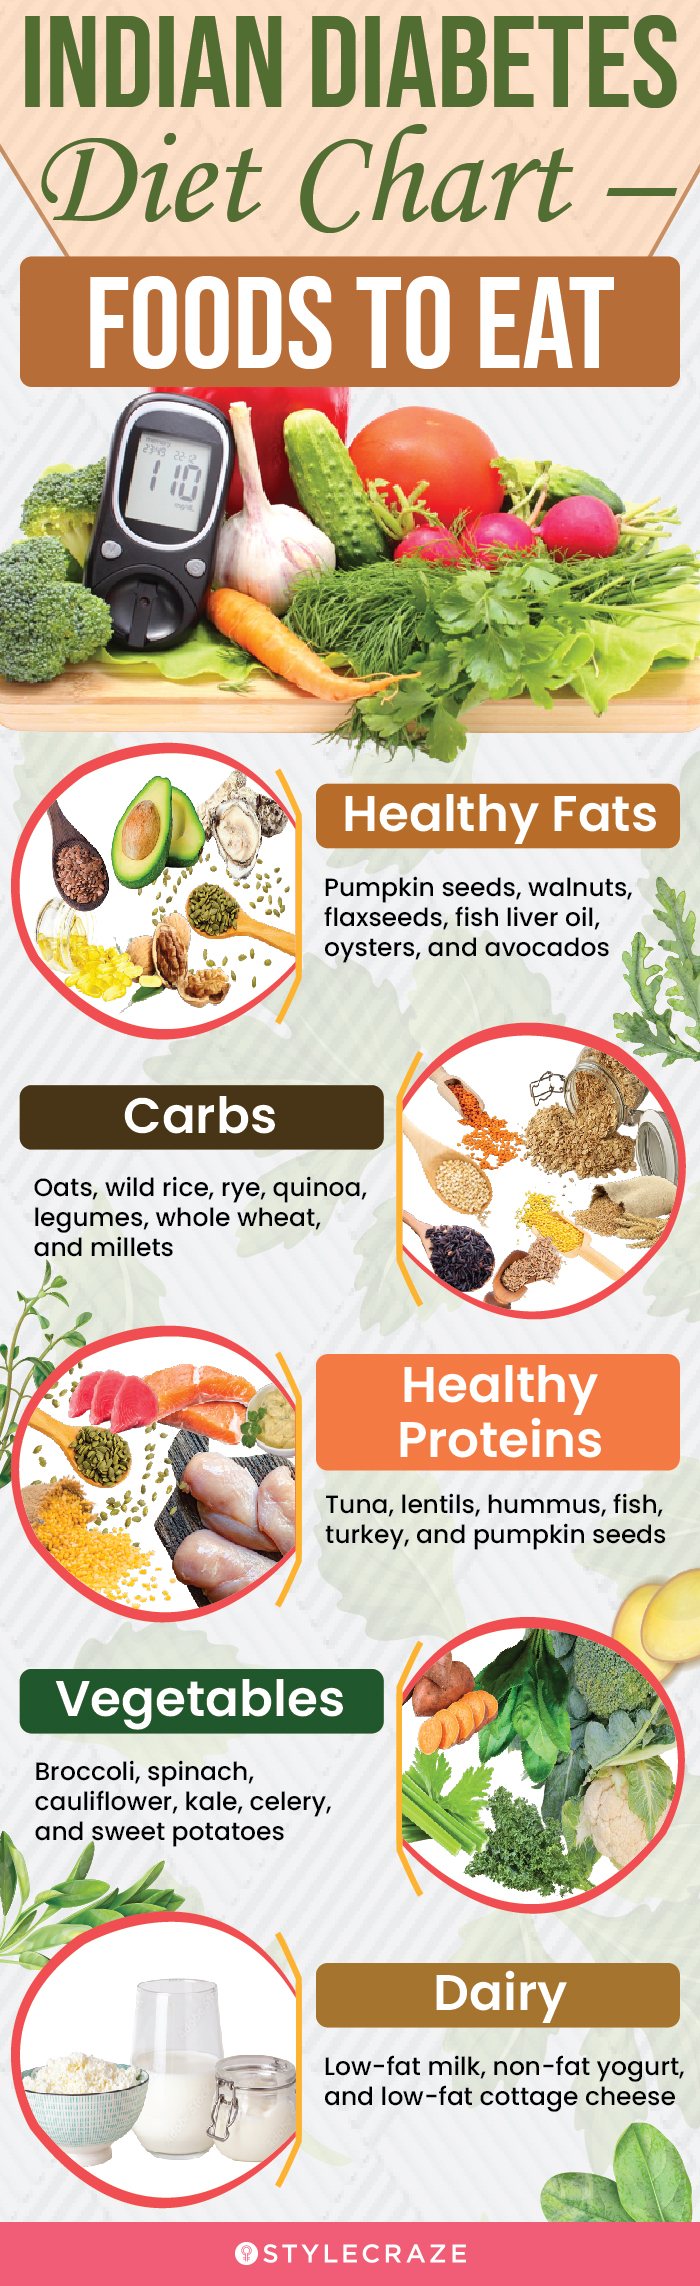 indian diabetes diet chart – foods to eat(infographic)